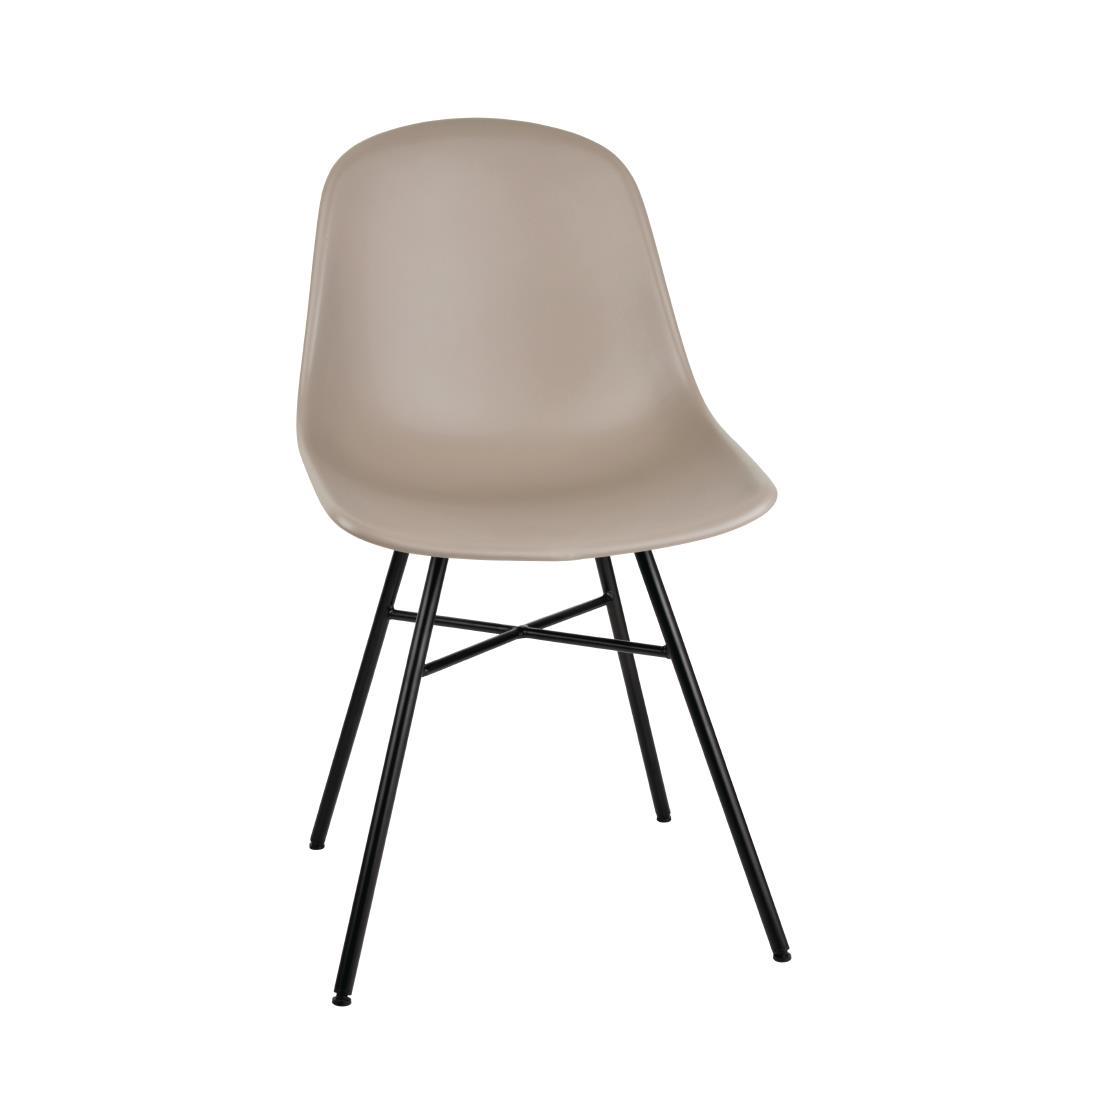 Bolero Arlo Side Chair with Metal Frame Coffee (Pack of 2) - DY349  - 1